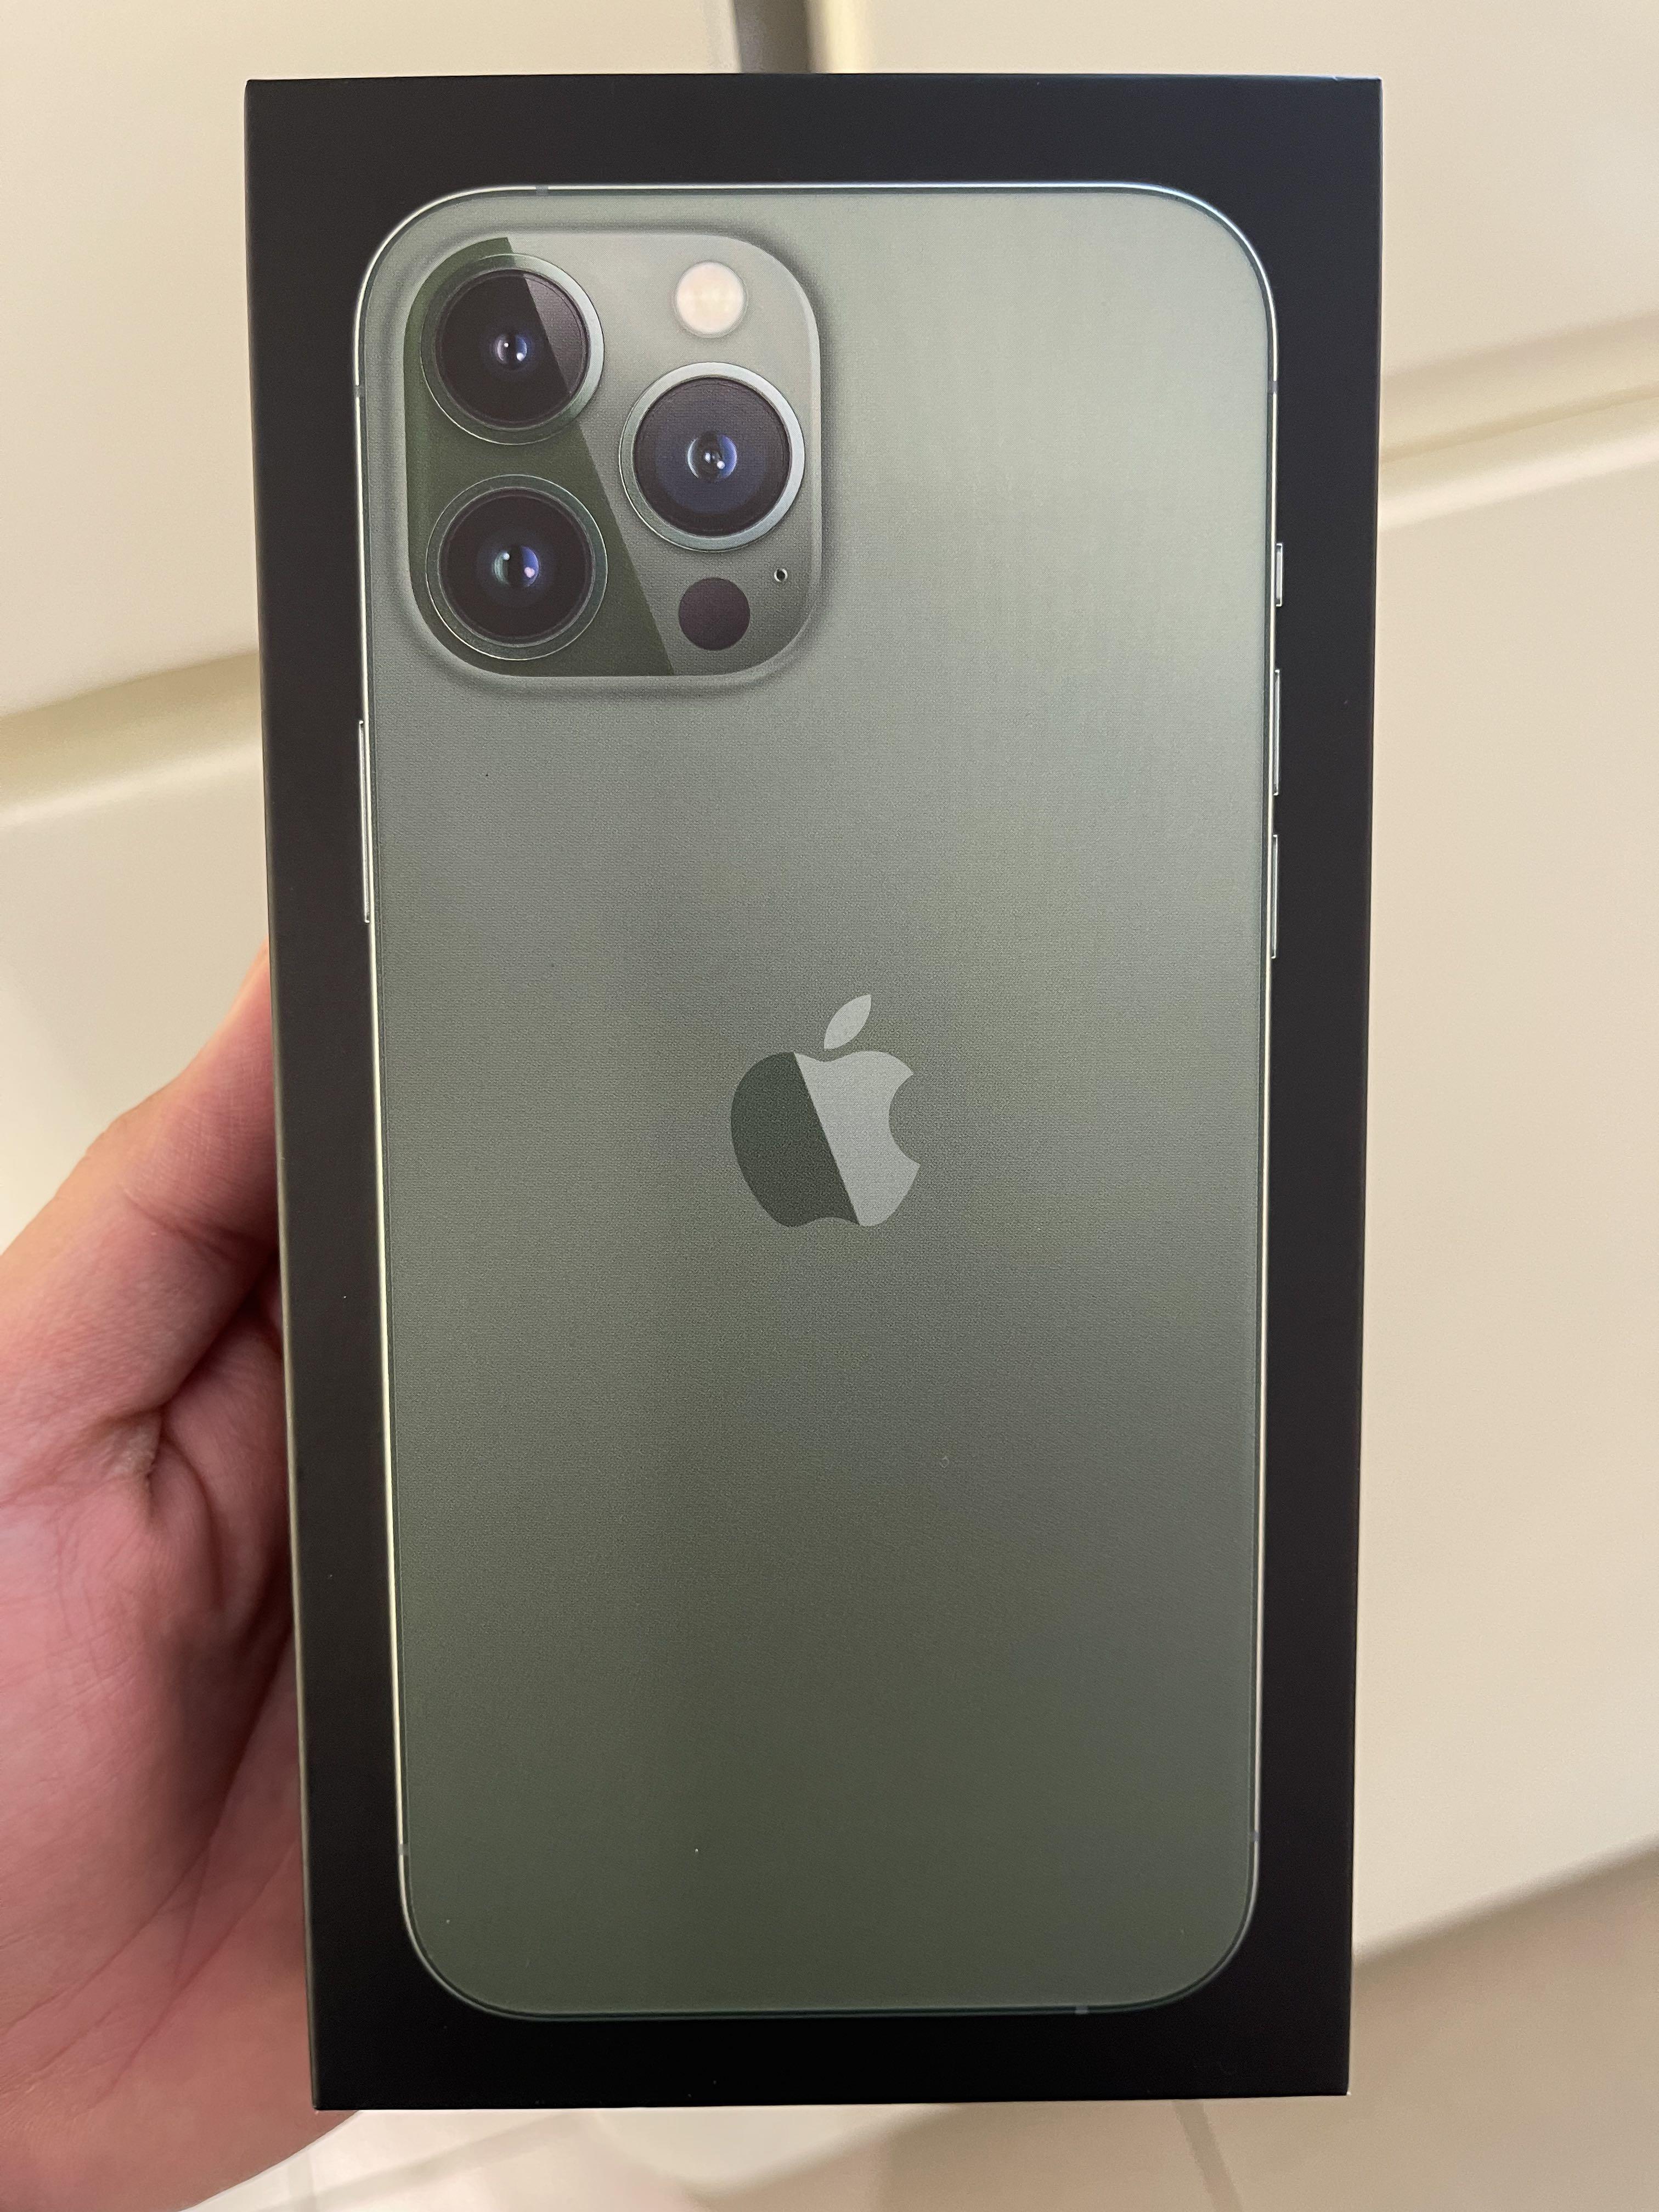 Apple iPhone 13 Pro Max - 1TB (Alpine Green) Brand new, Factory unlocked in  sealed box with warranty at best price in Moradabad